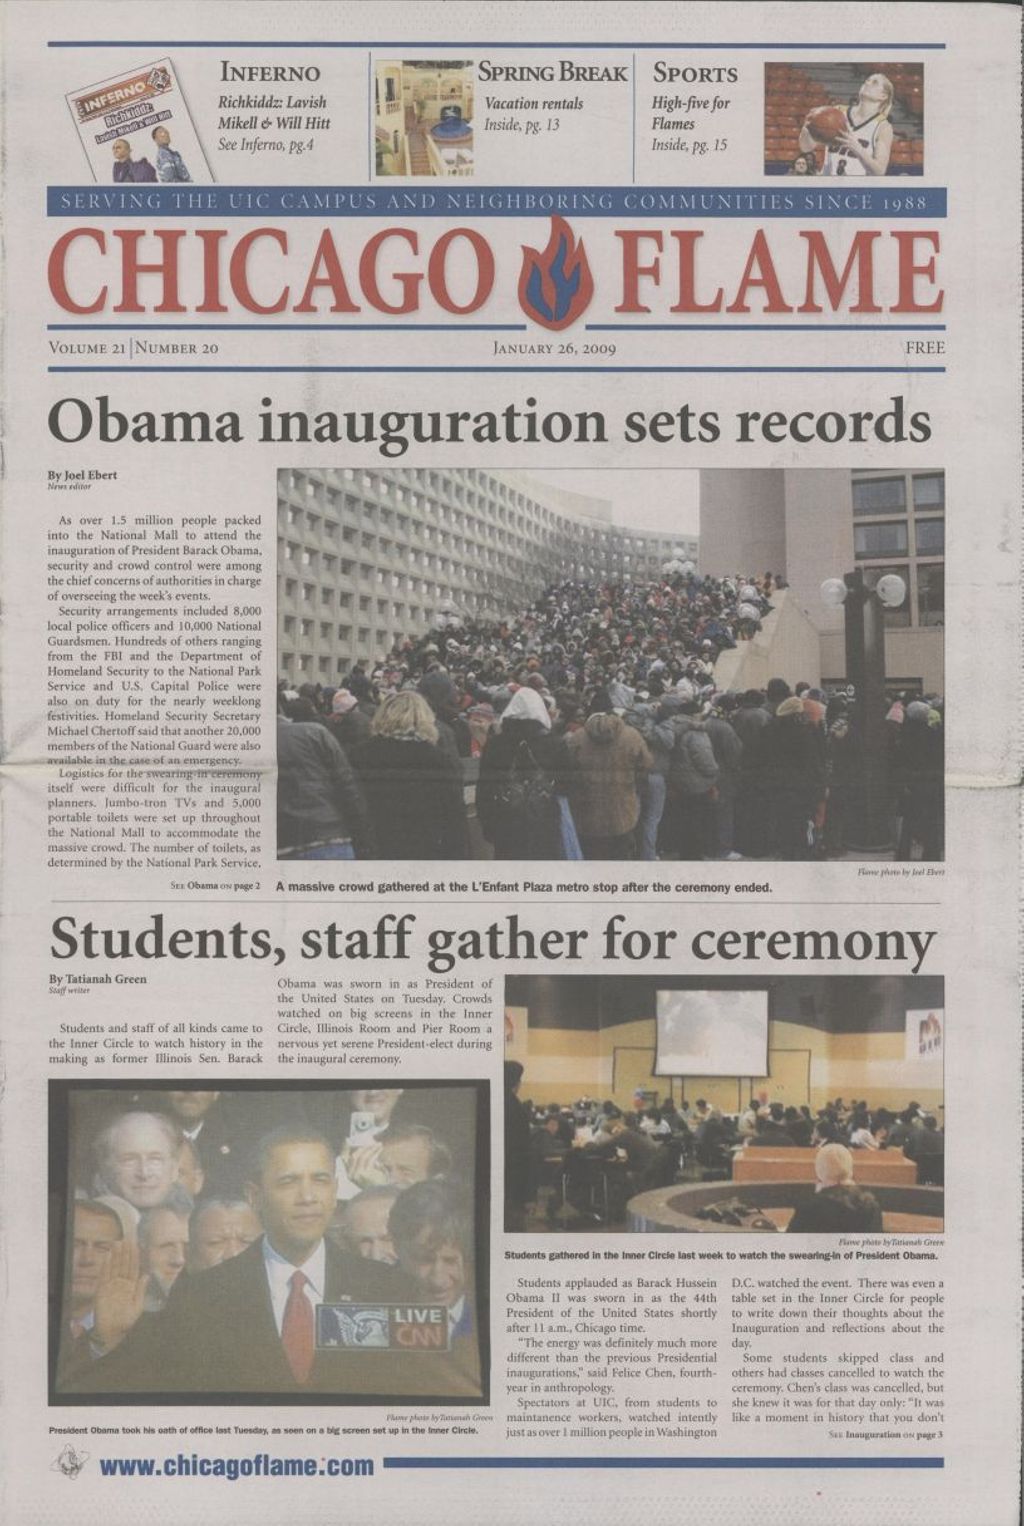 Miniature of Chicago Flame (January 26, 2009)